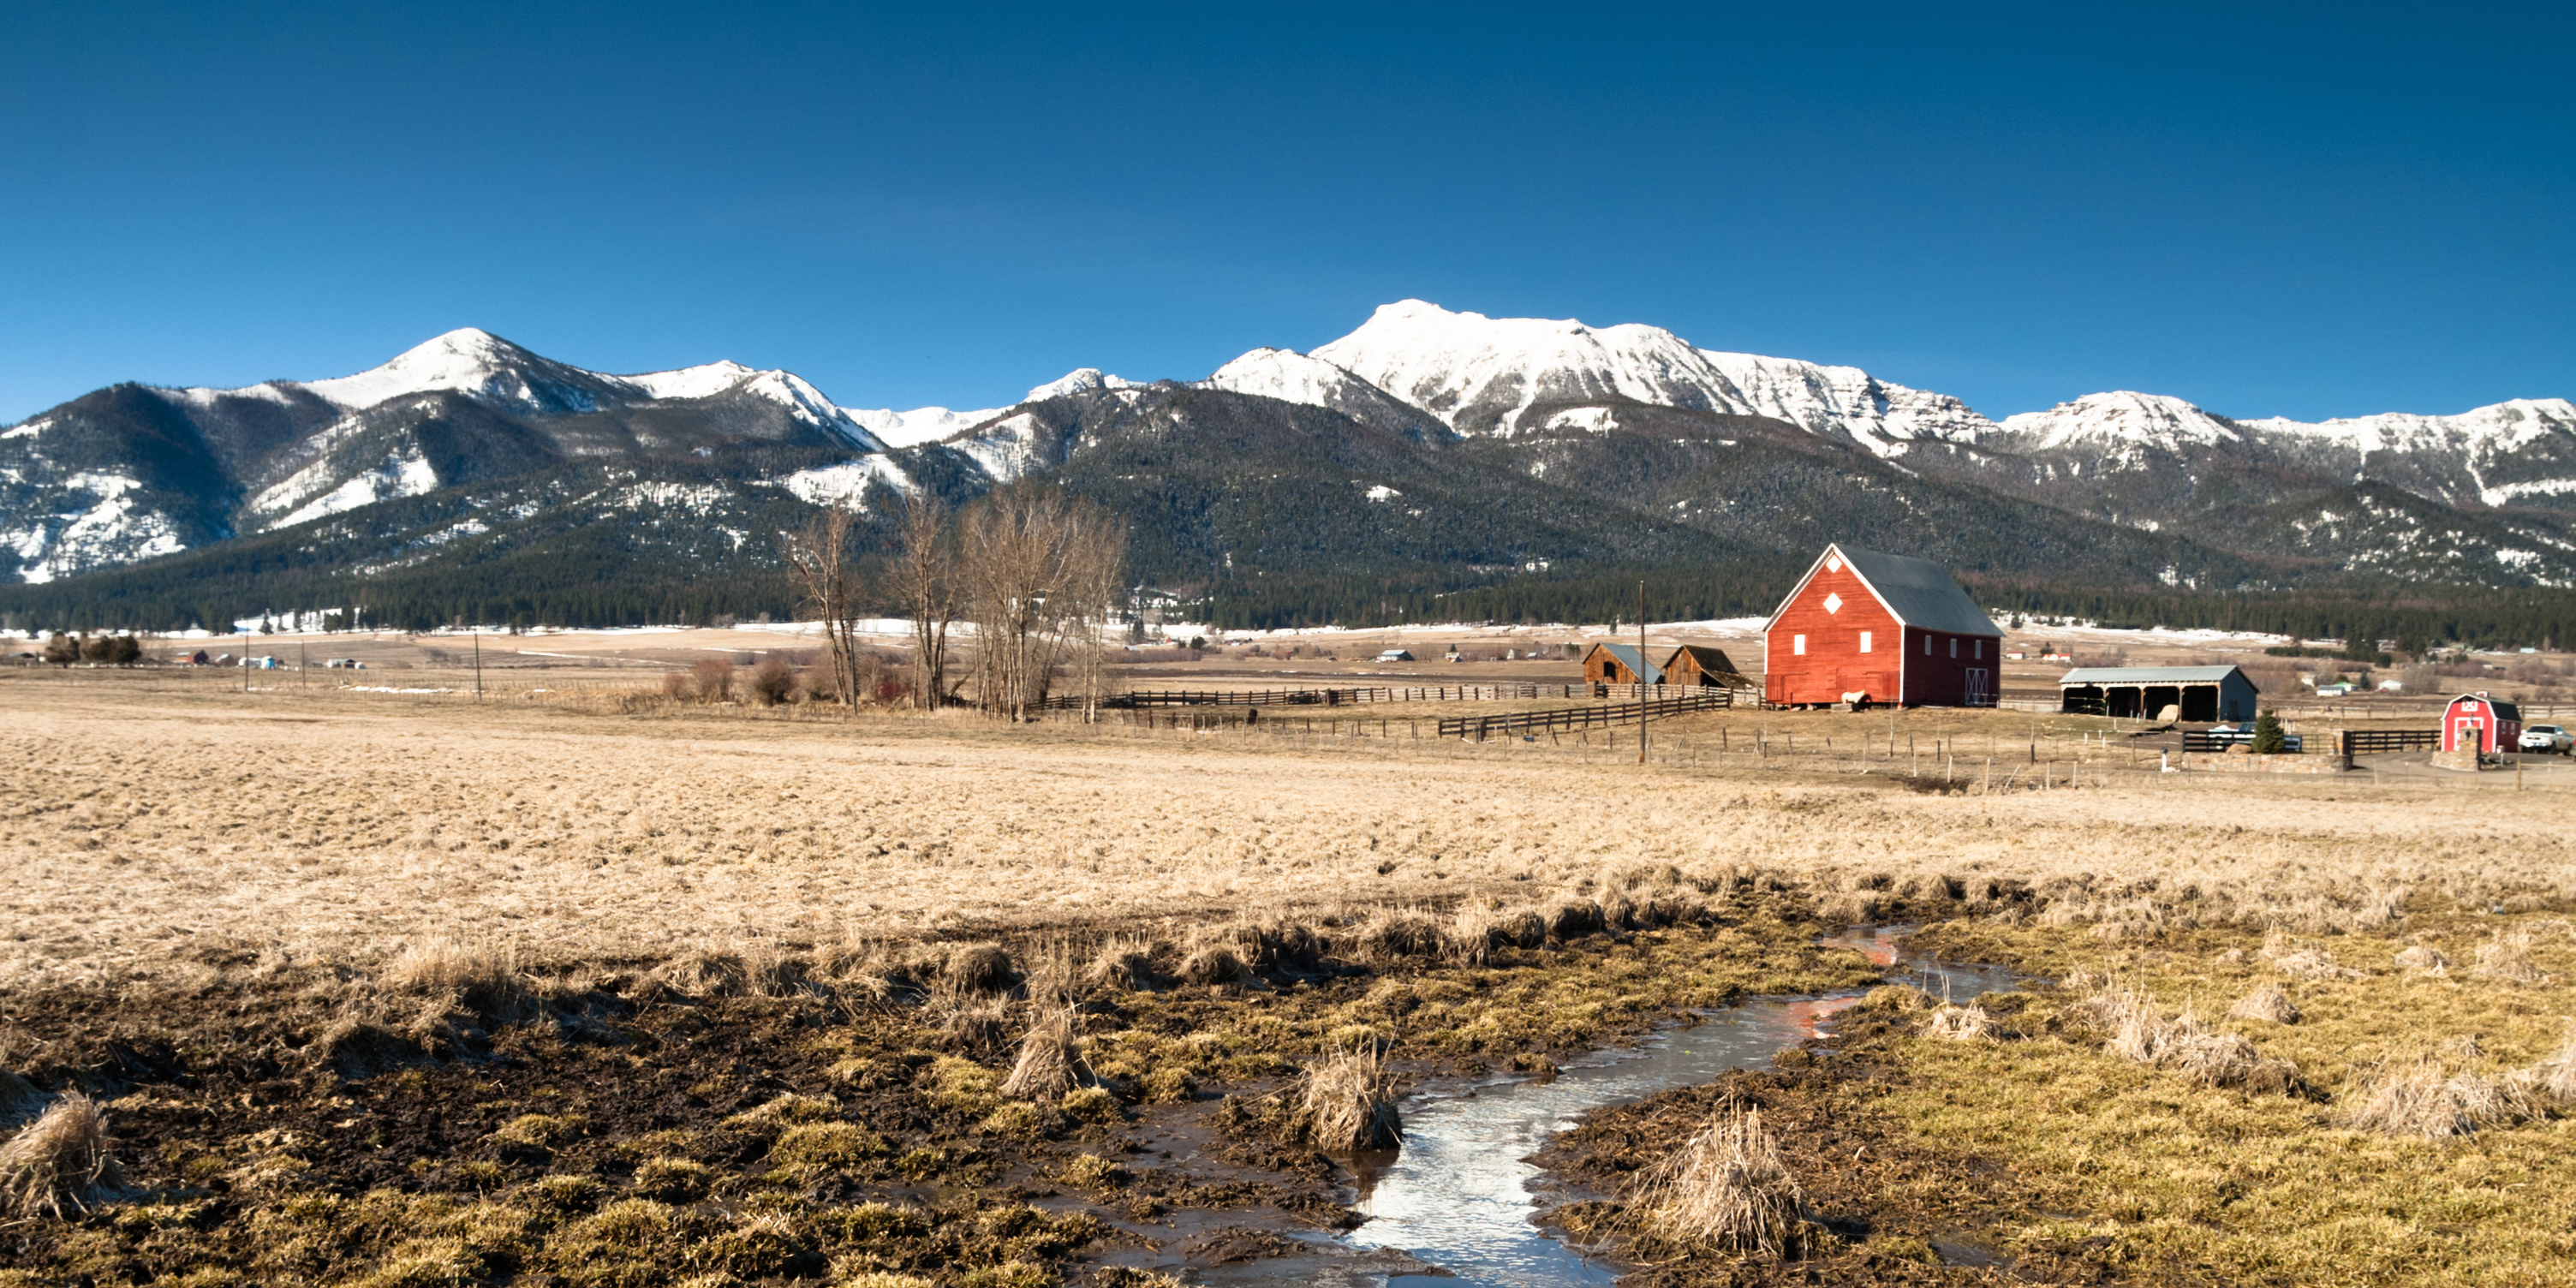 Red barn at the foot of large mountain range. 